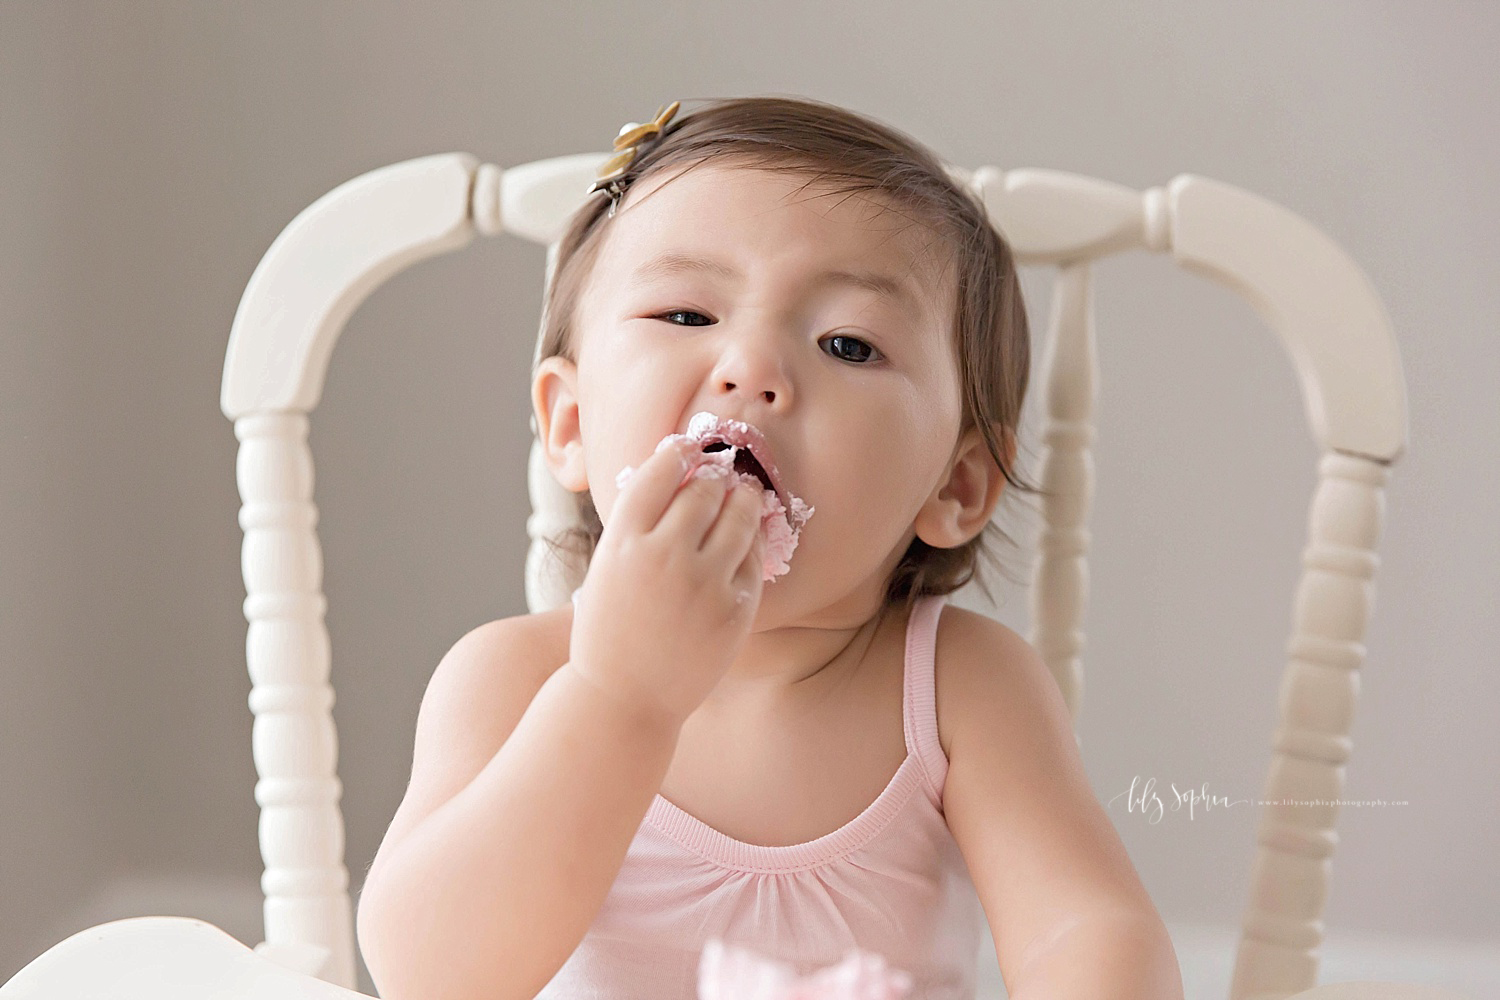  Image of an Asian, baby, girl, stuffing her icing covered fingers into her mouth.&nbsp; 